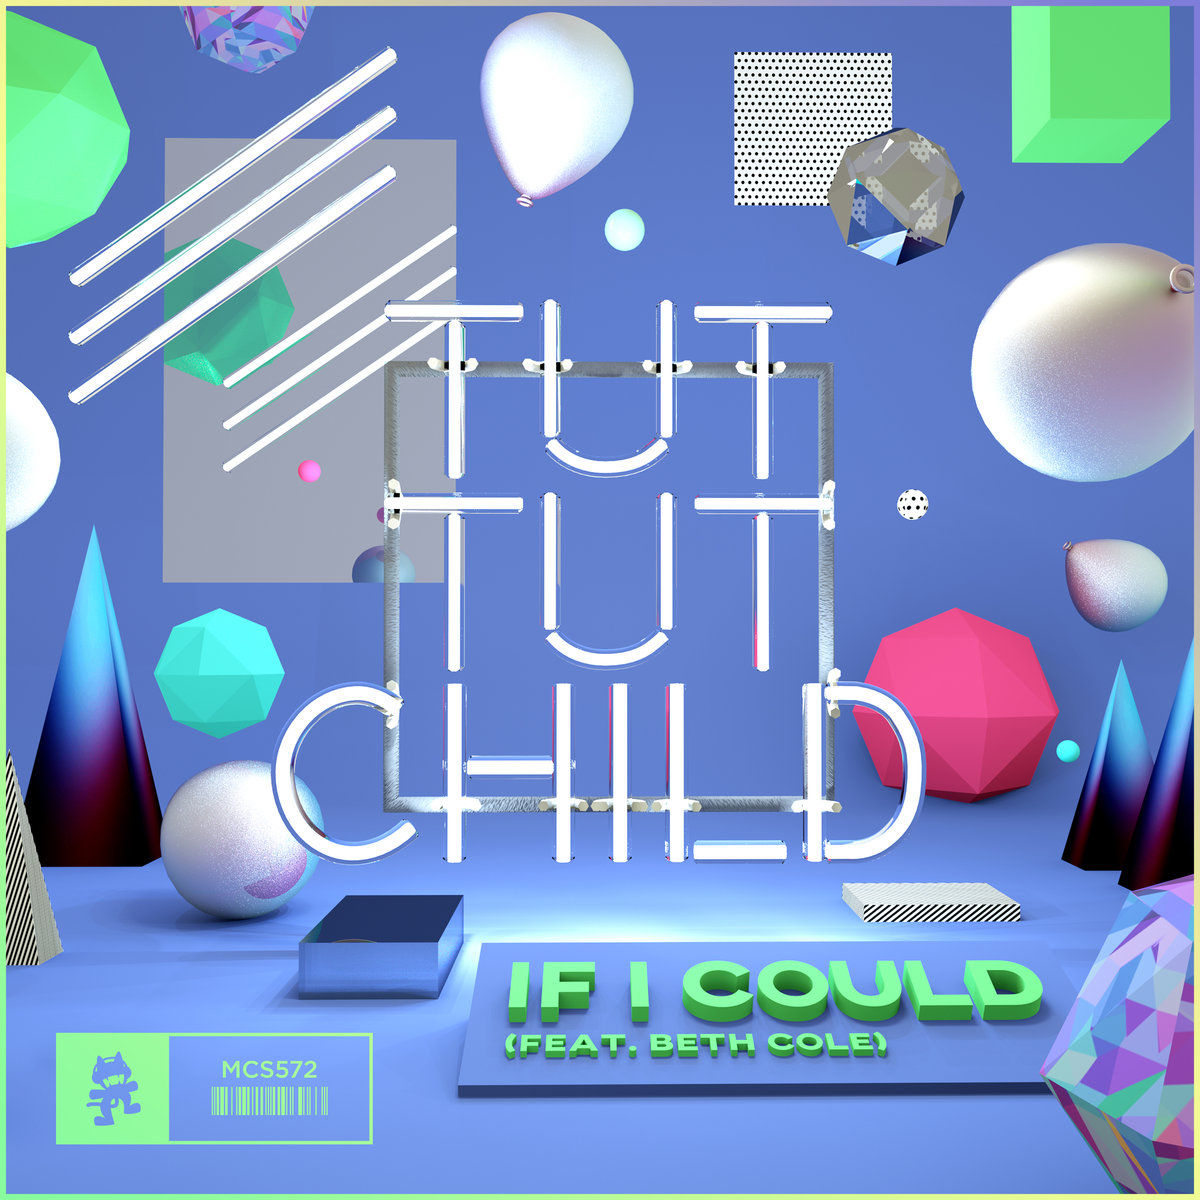 Tut Tut Child - If I Could (Feat. Beth Cole) [Monstercat Release] (신비, 일렉, 격렬, 비트)